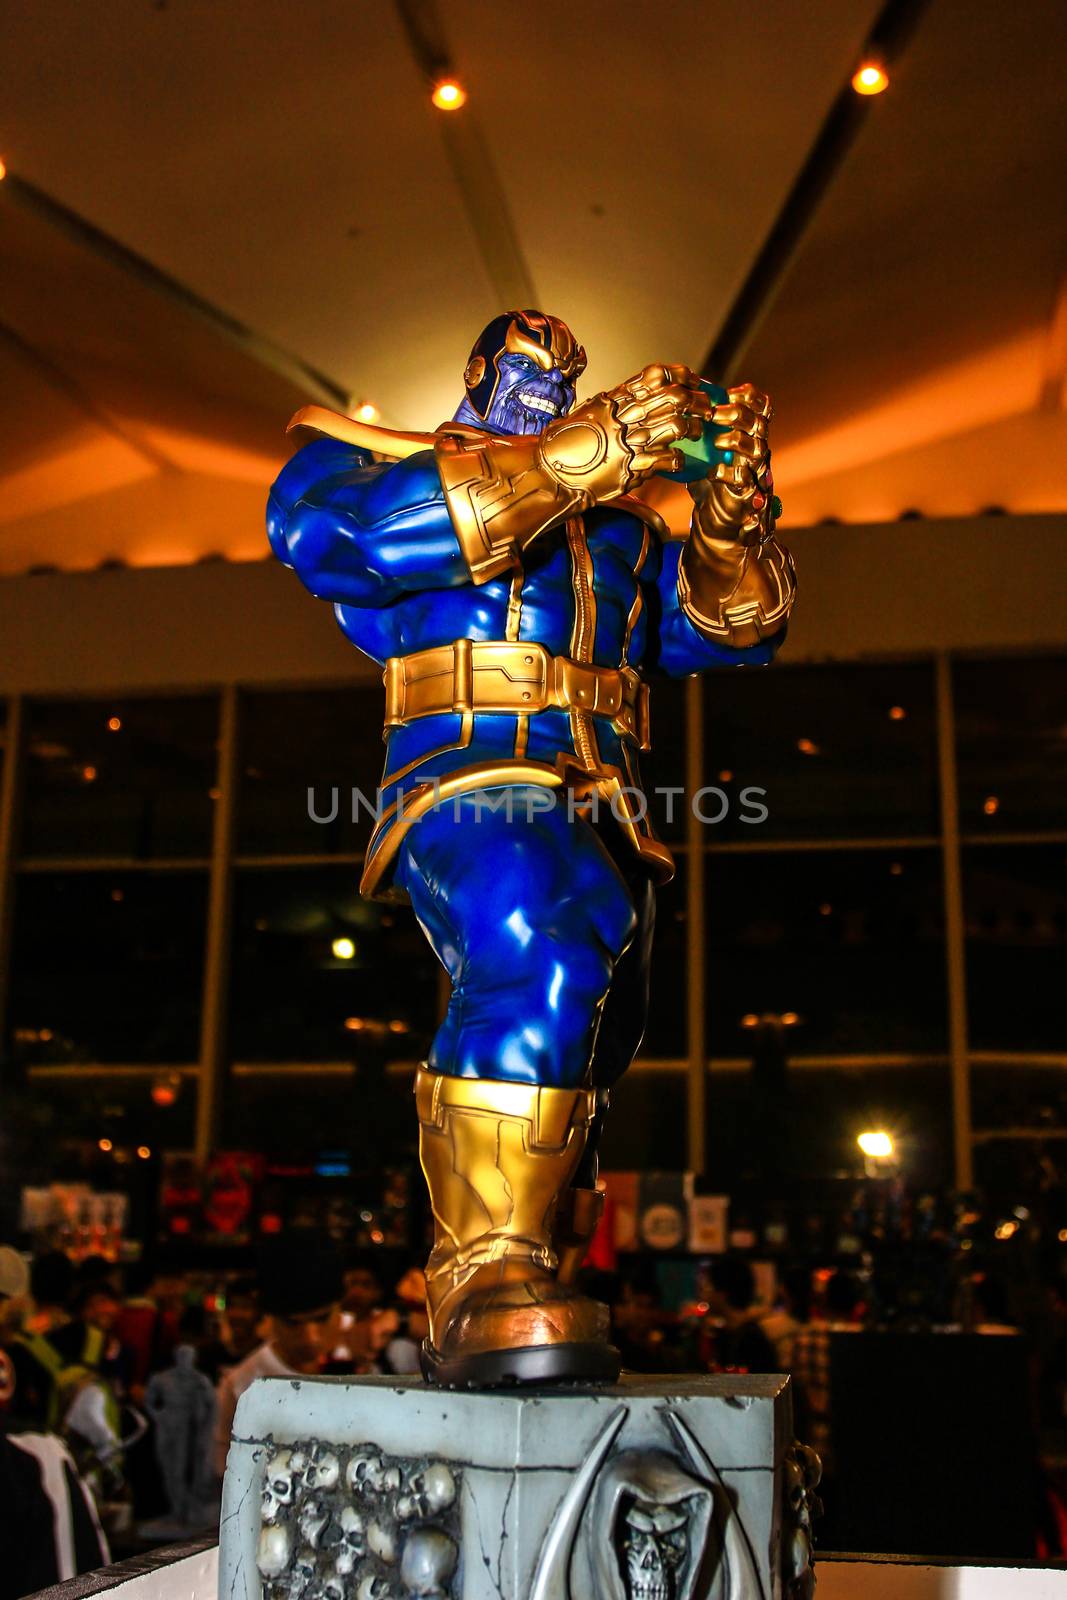 A model of the character  Thanos from the movies and comics by redthirteen